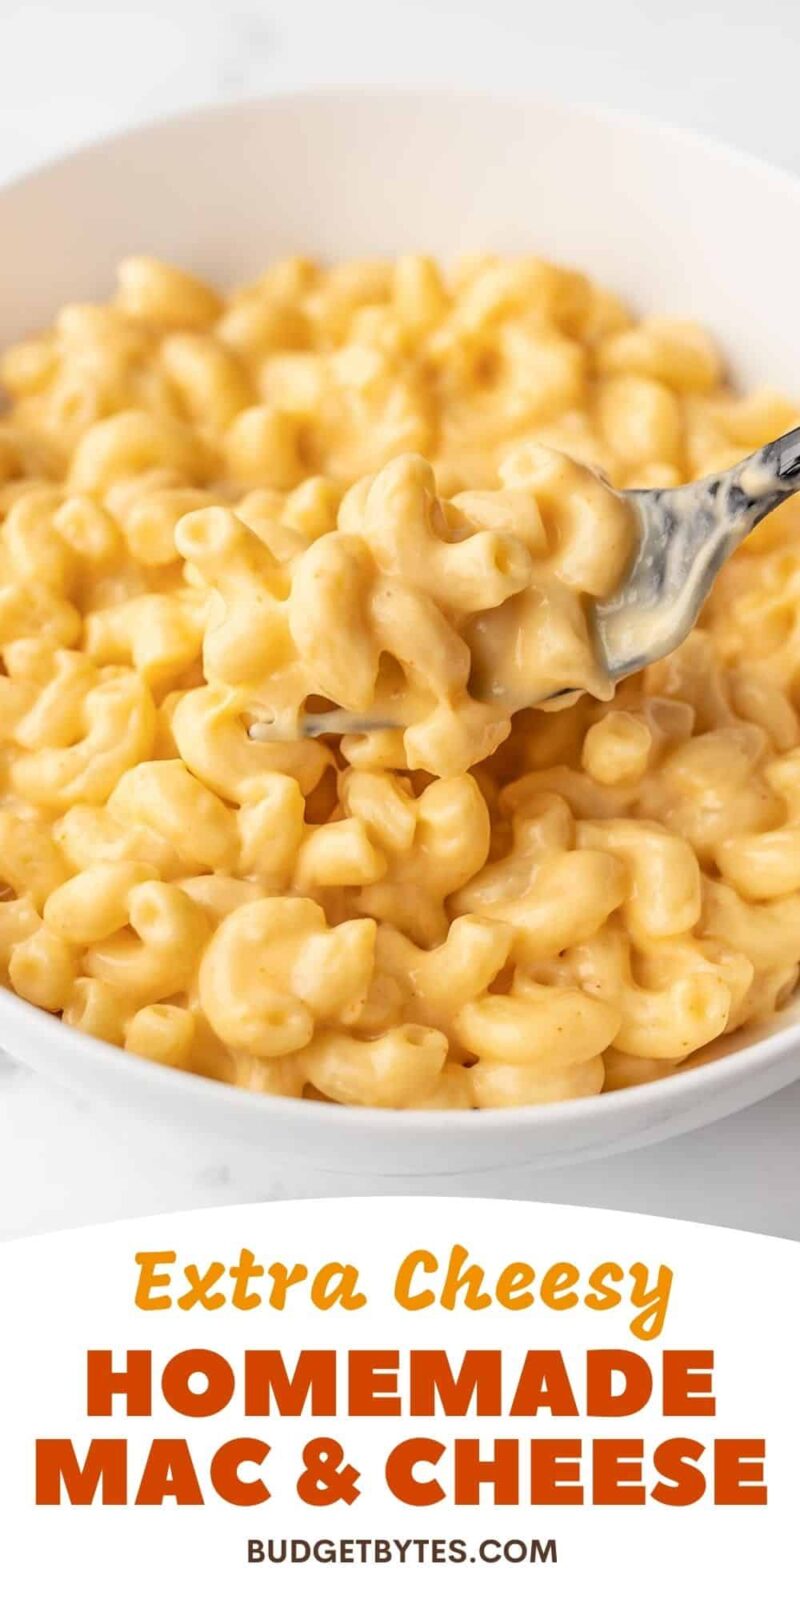 Side view of a bowl of mac and cheese, title text at the bottom